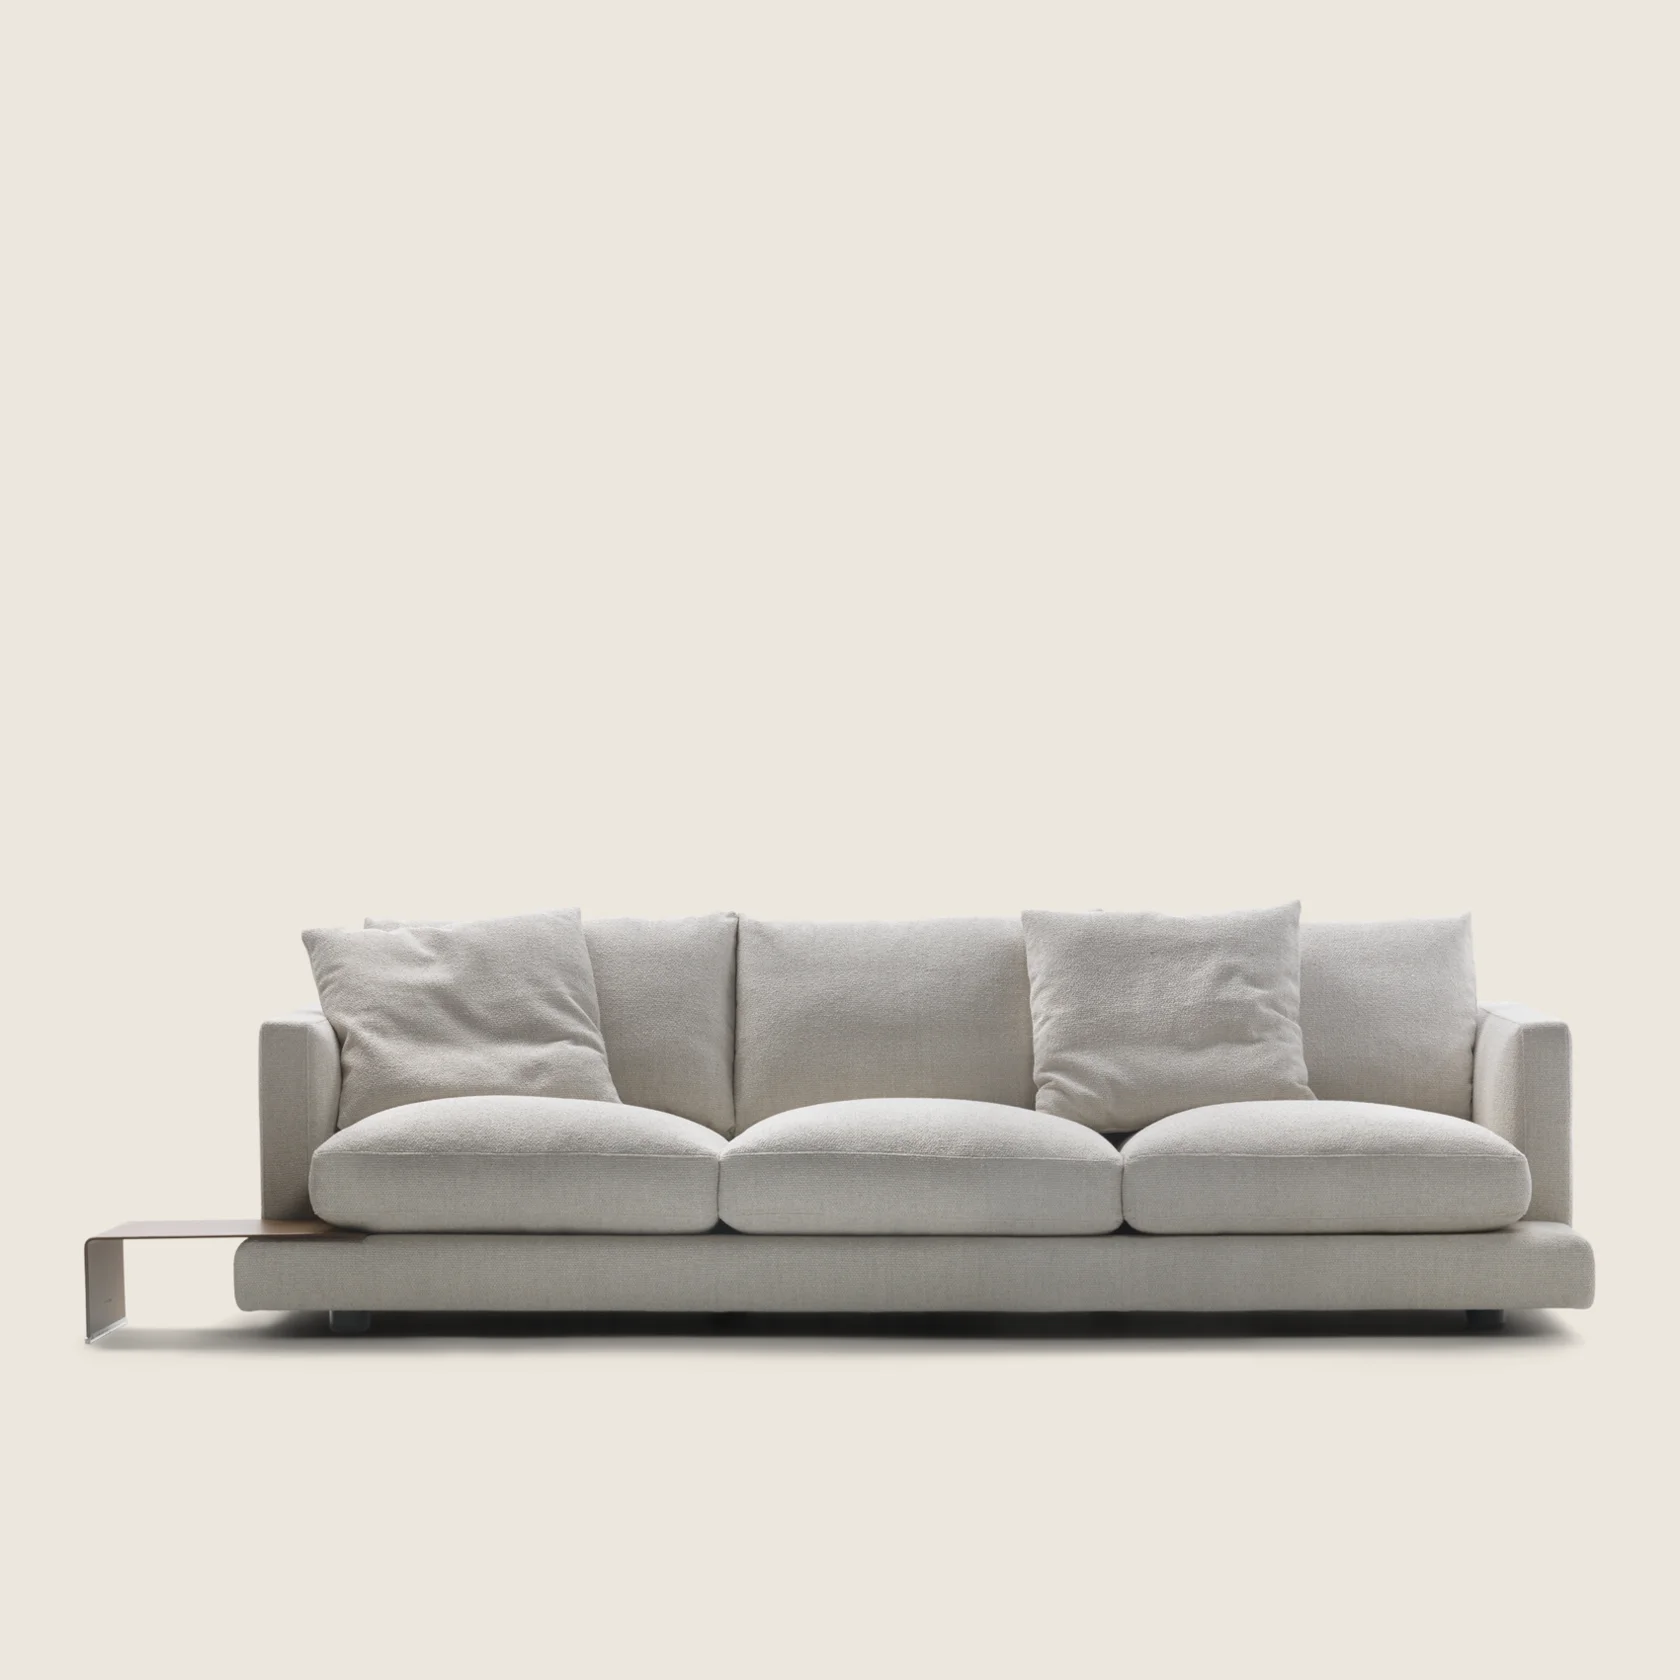 LONG ISLAND 05 Stand-alone sofas | Design Made in Italy - Flexform